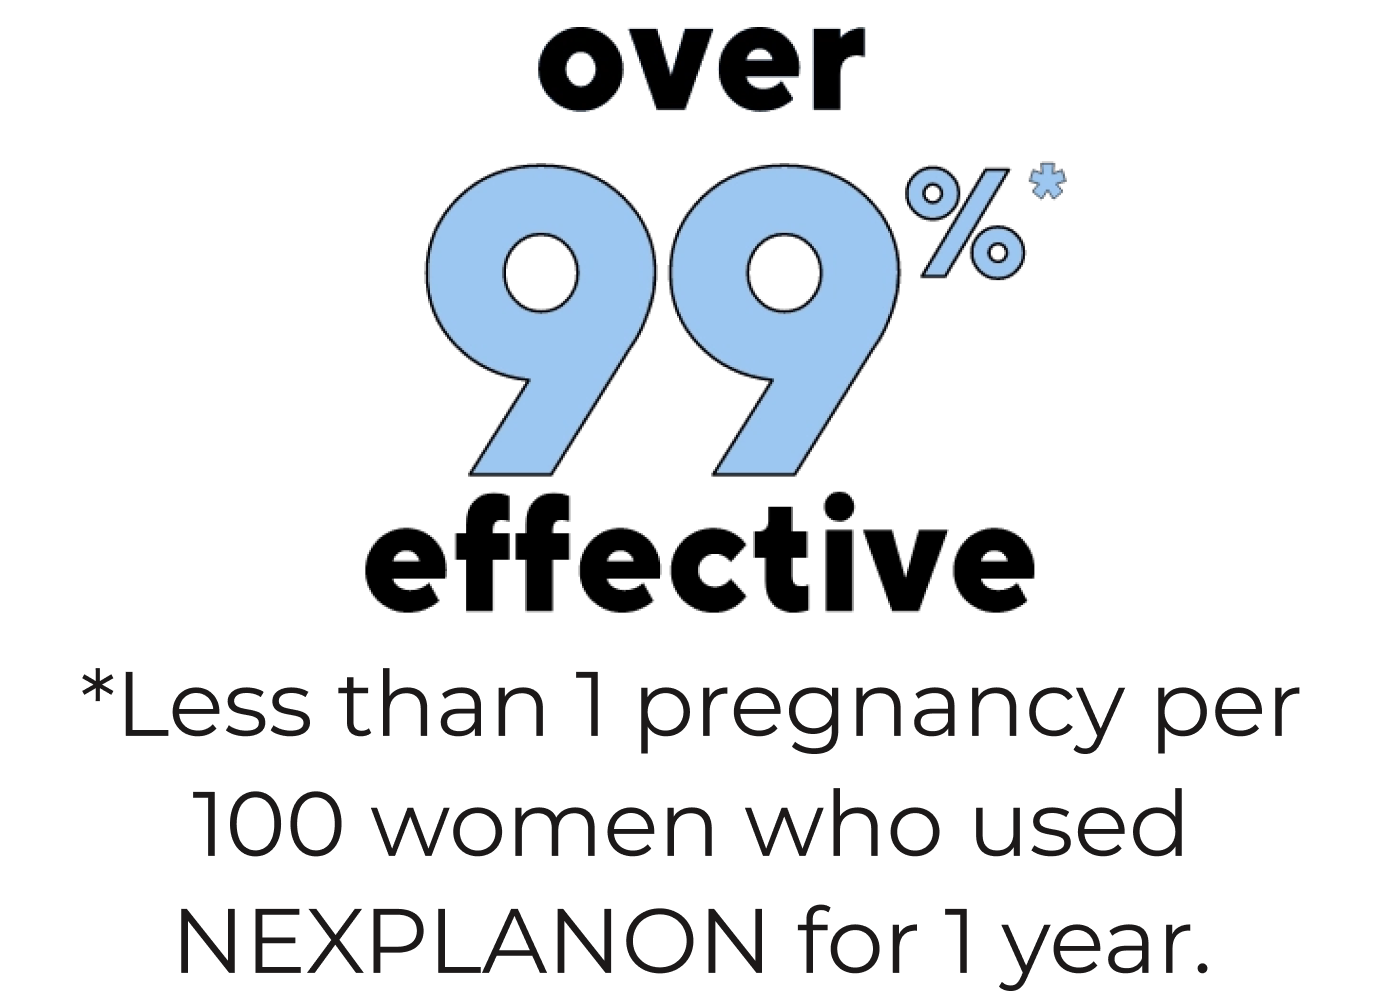 Over 99% Effective: Less Than 1 Pregnancy per 100 Women Who Used NEXPLANON® (etonogestrel implant) 68 mg Radiopaque for 1 Year